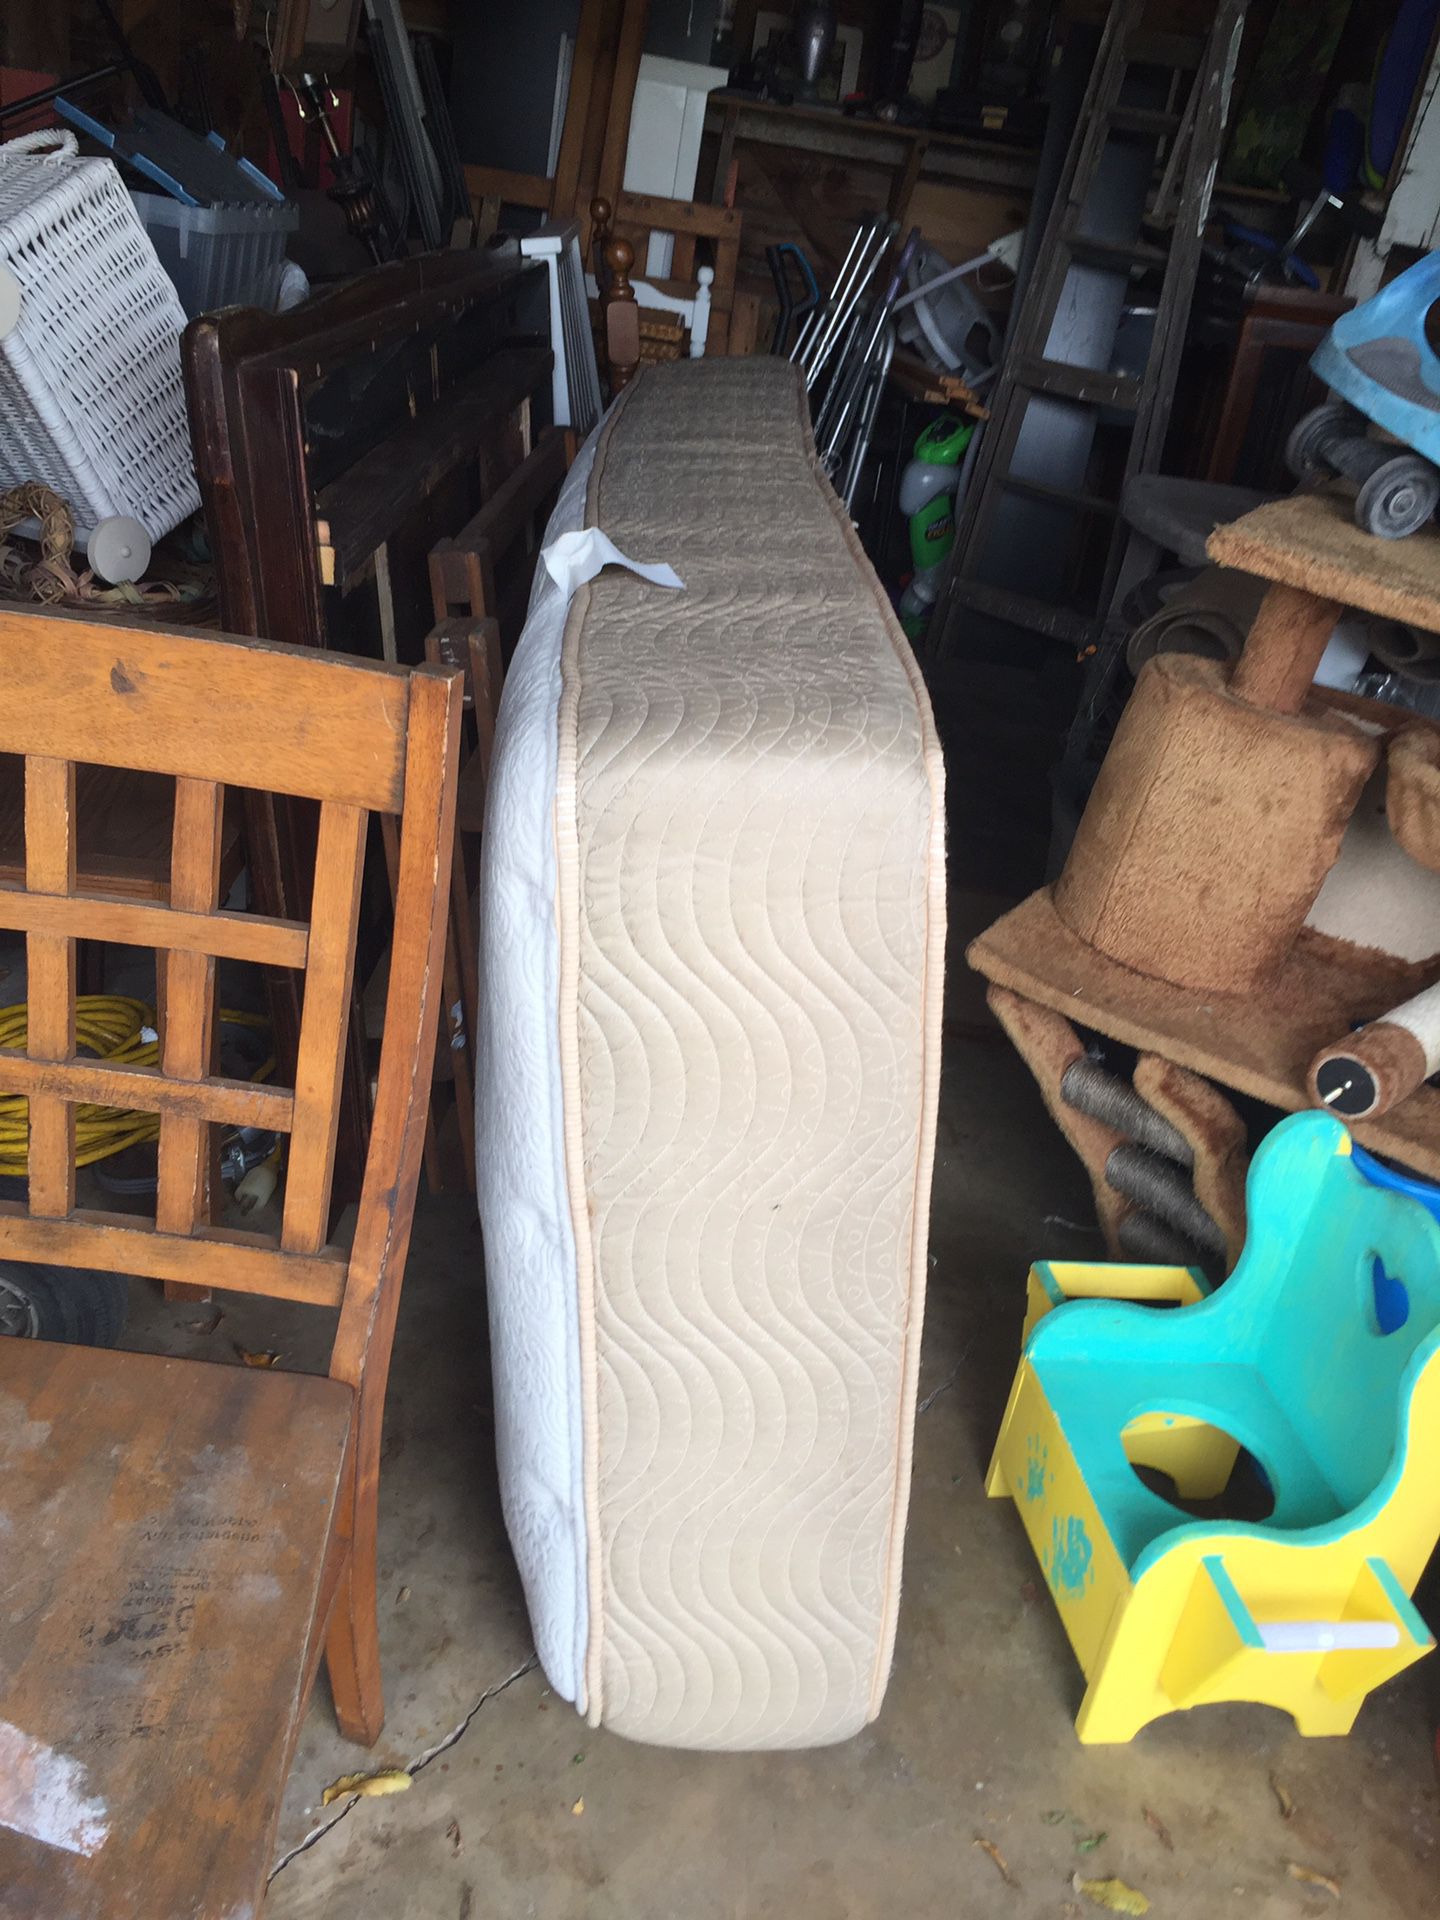 Twin size mattress over 10” thick